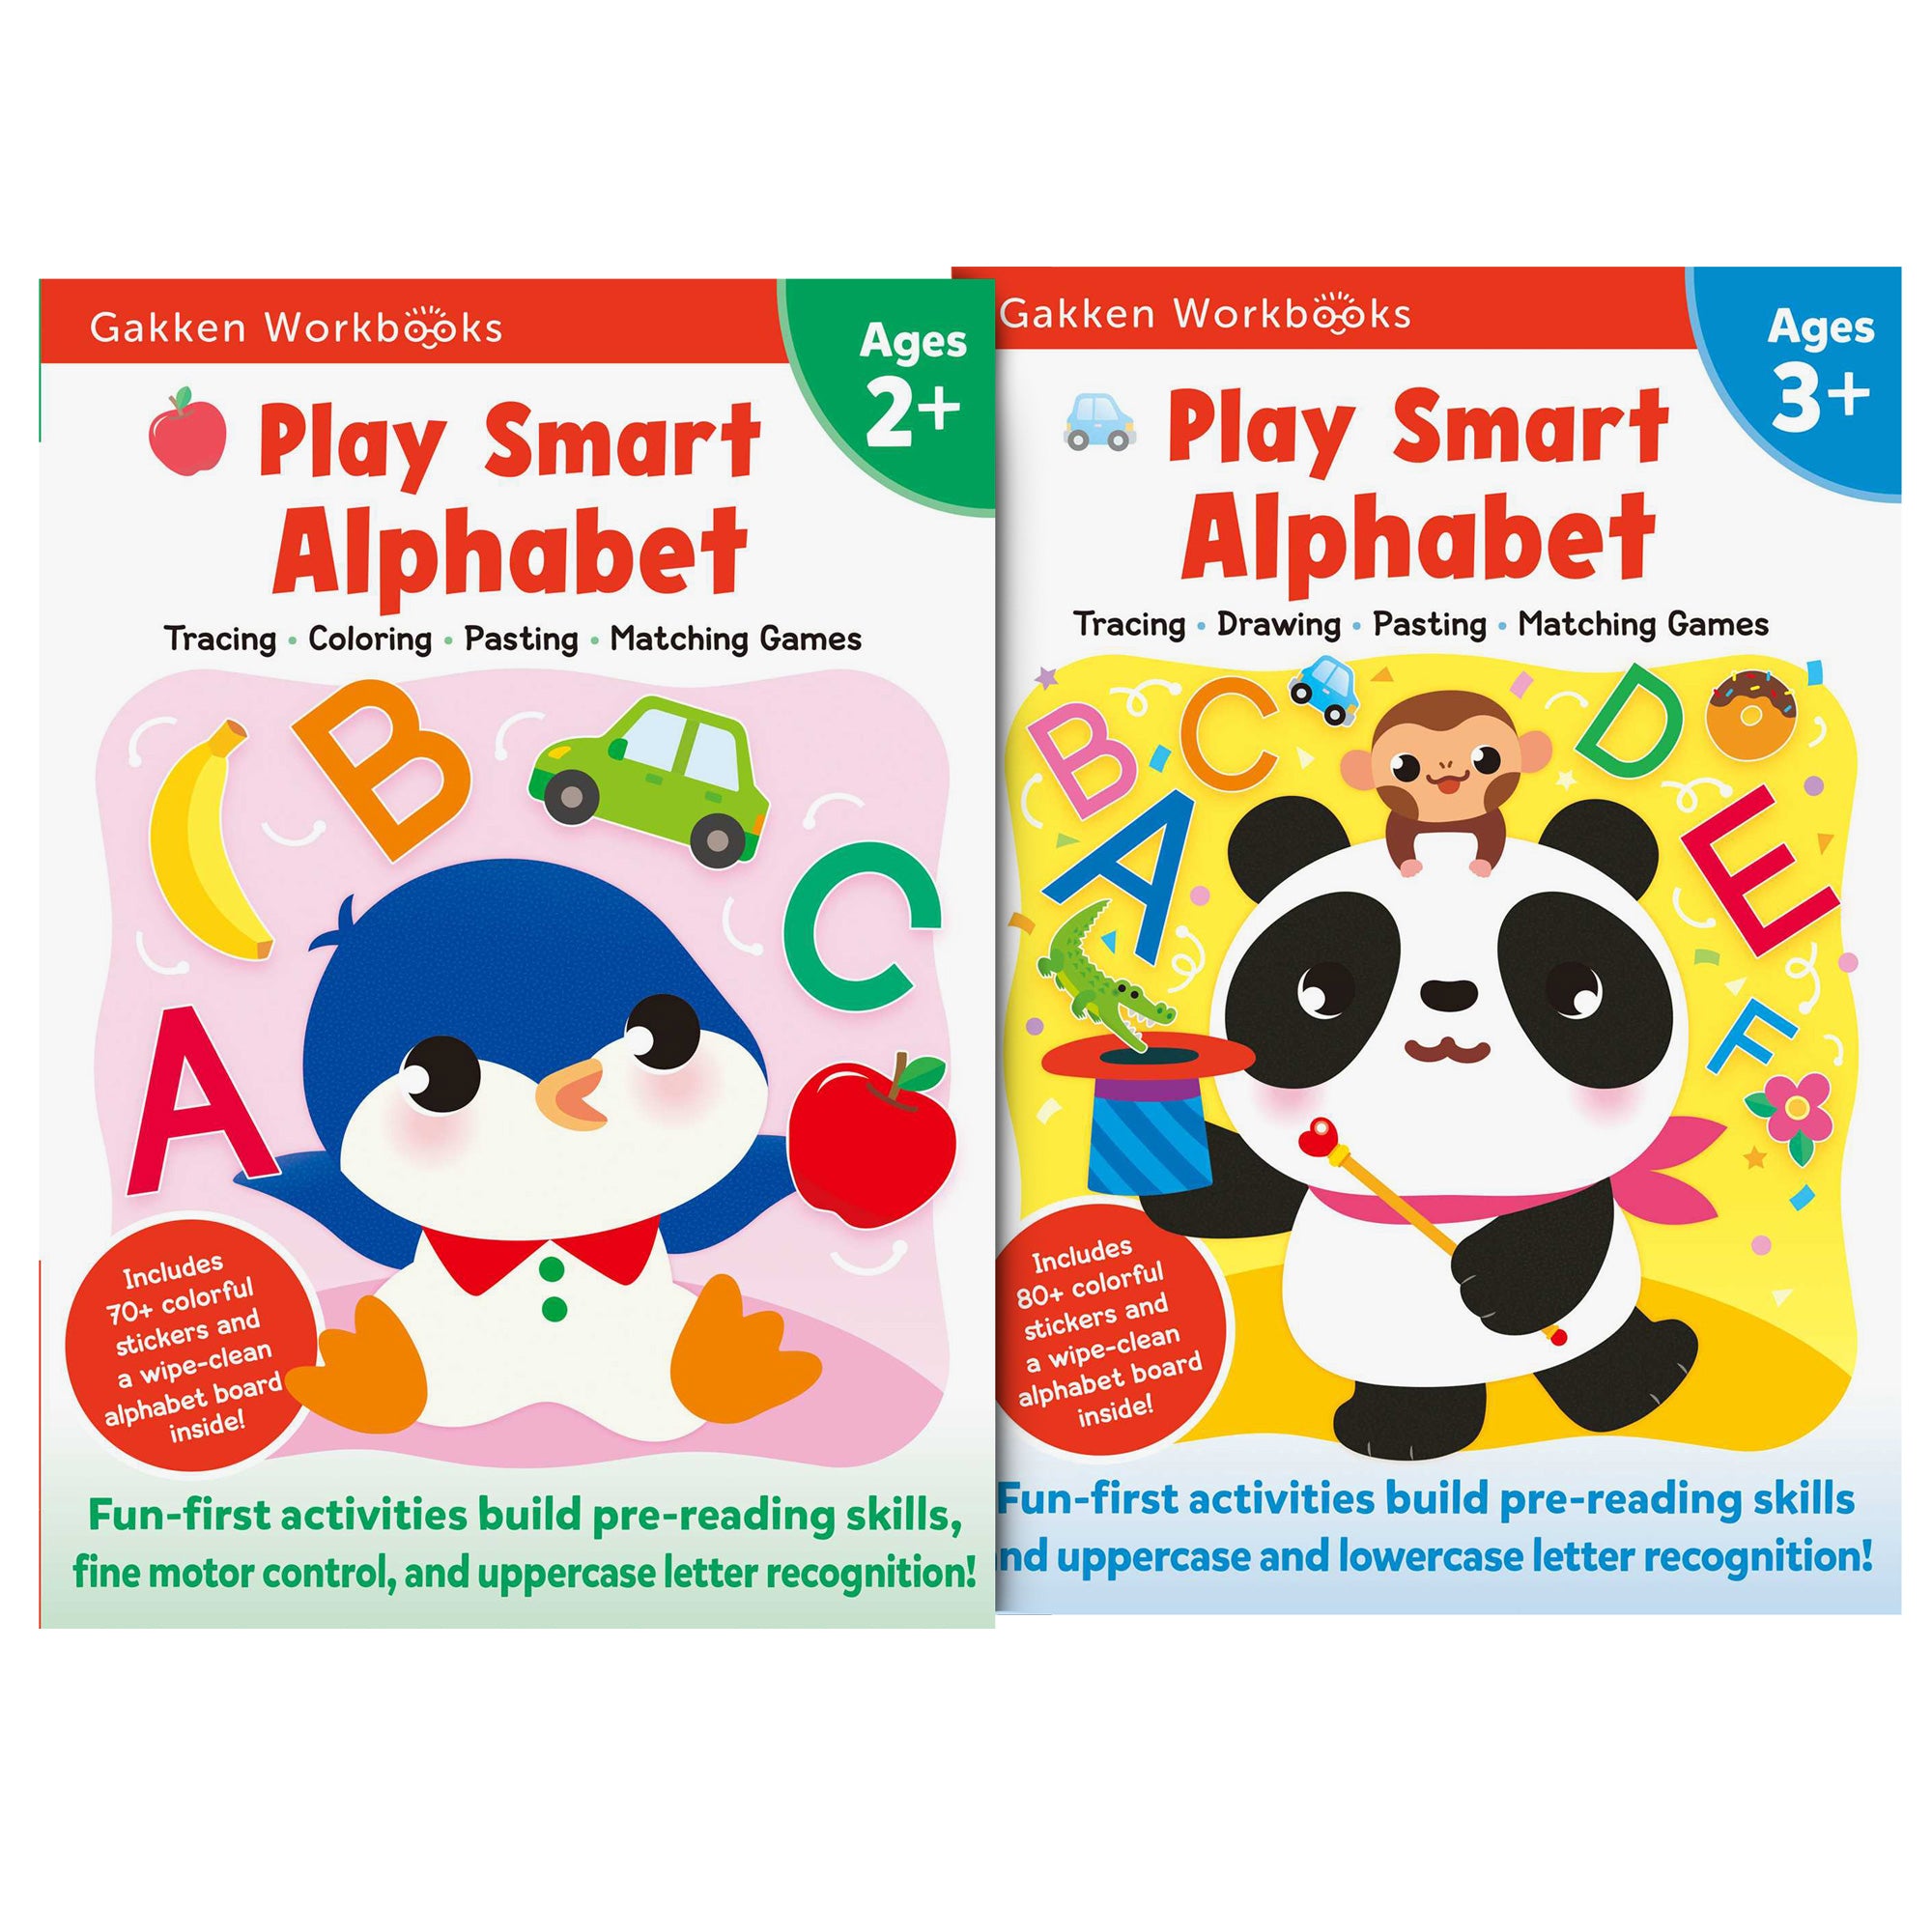 Play Smart Alphabet set, The left book shows a penguin with his wings out. Floating above his head are the letters A, B, and C and a banana, car, and apple. On the right book cover is a panda performing magic. The panda is wearing a pink scarf and holding a colorful top hat and a wand. There is a small money resting on the panda's head. Above the panda, floating in the air above the panda are the letters A, B, C, D, E, F, and several items including a baby crocodile, blue car, chocolate donut, and a flower.